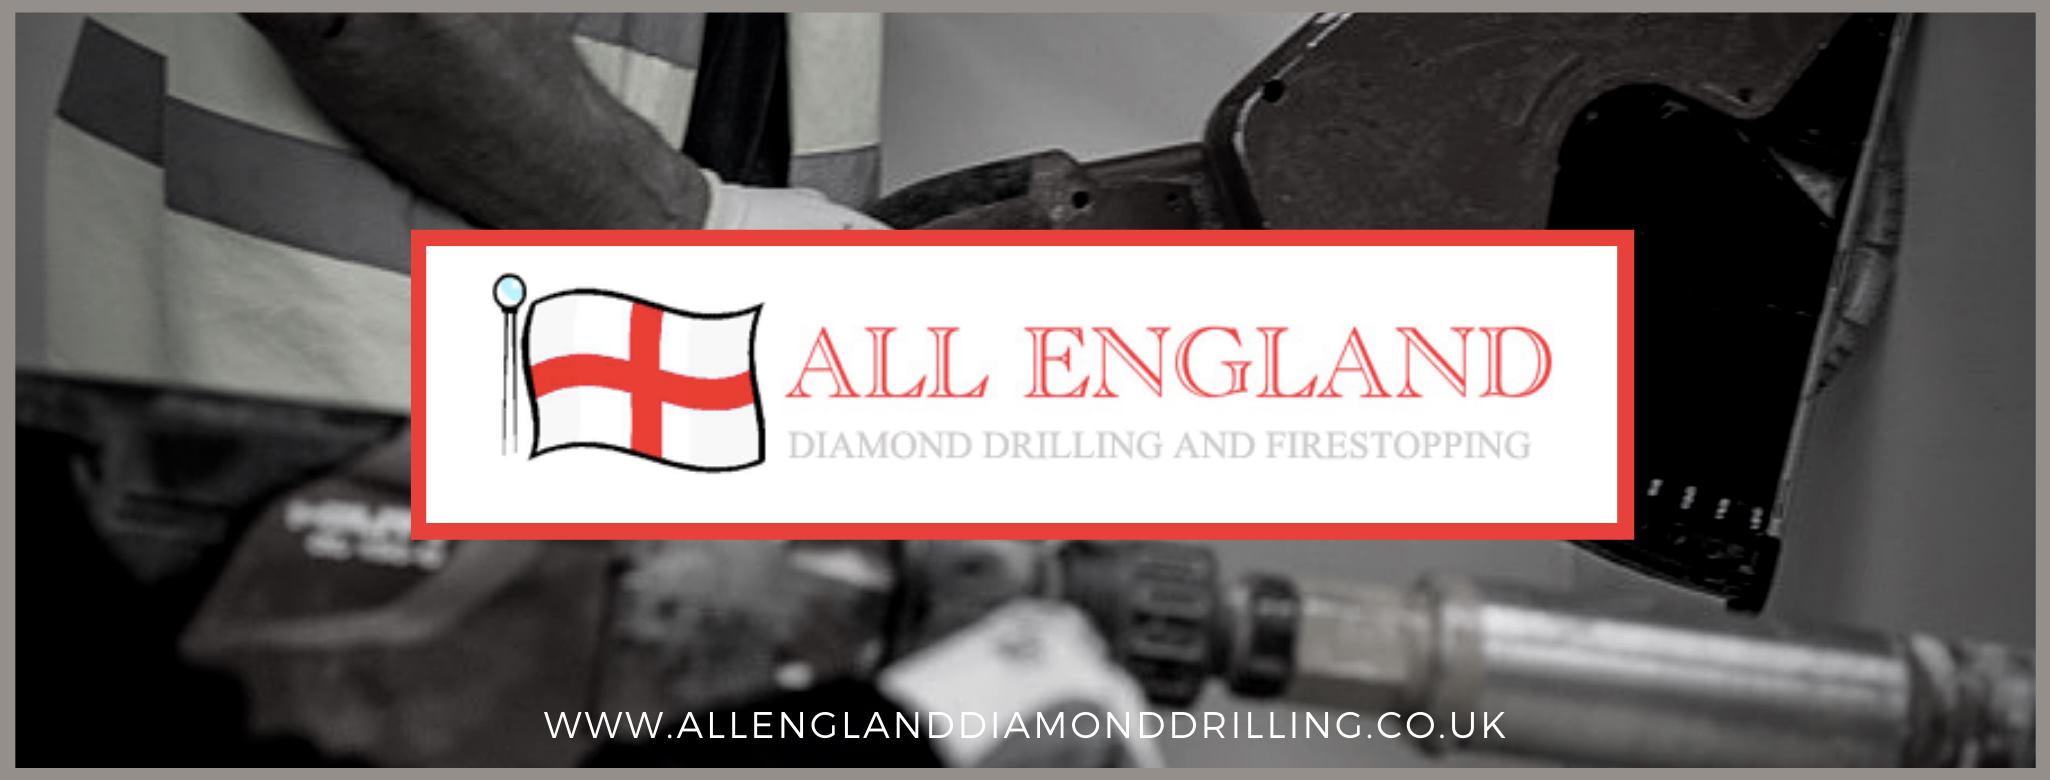 All England Fire Stopping & Diamond Drilling Ltd